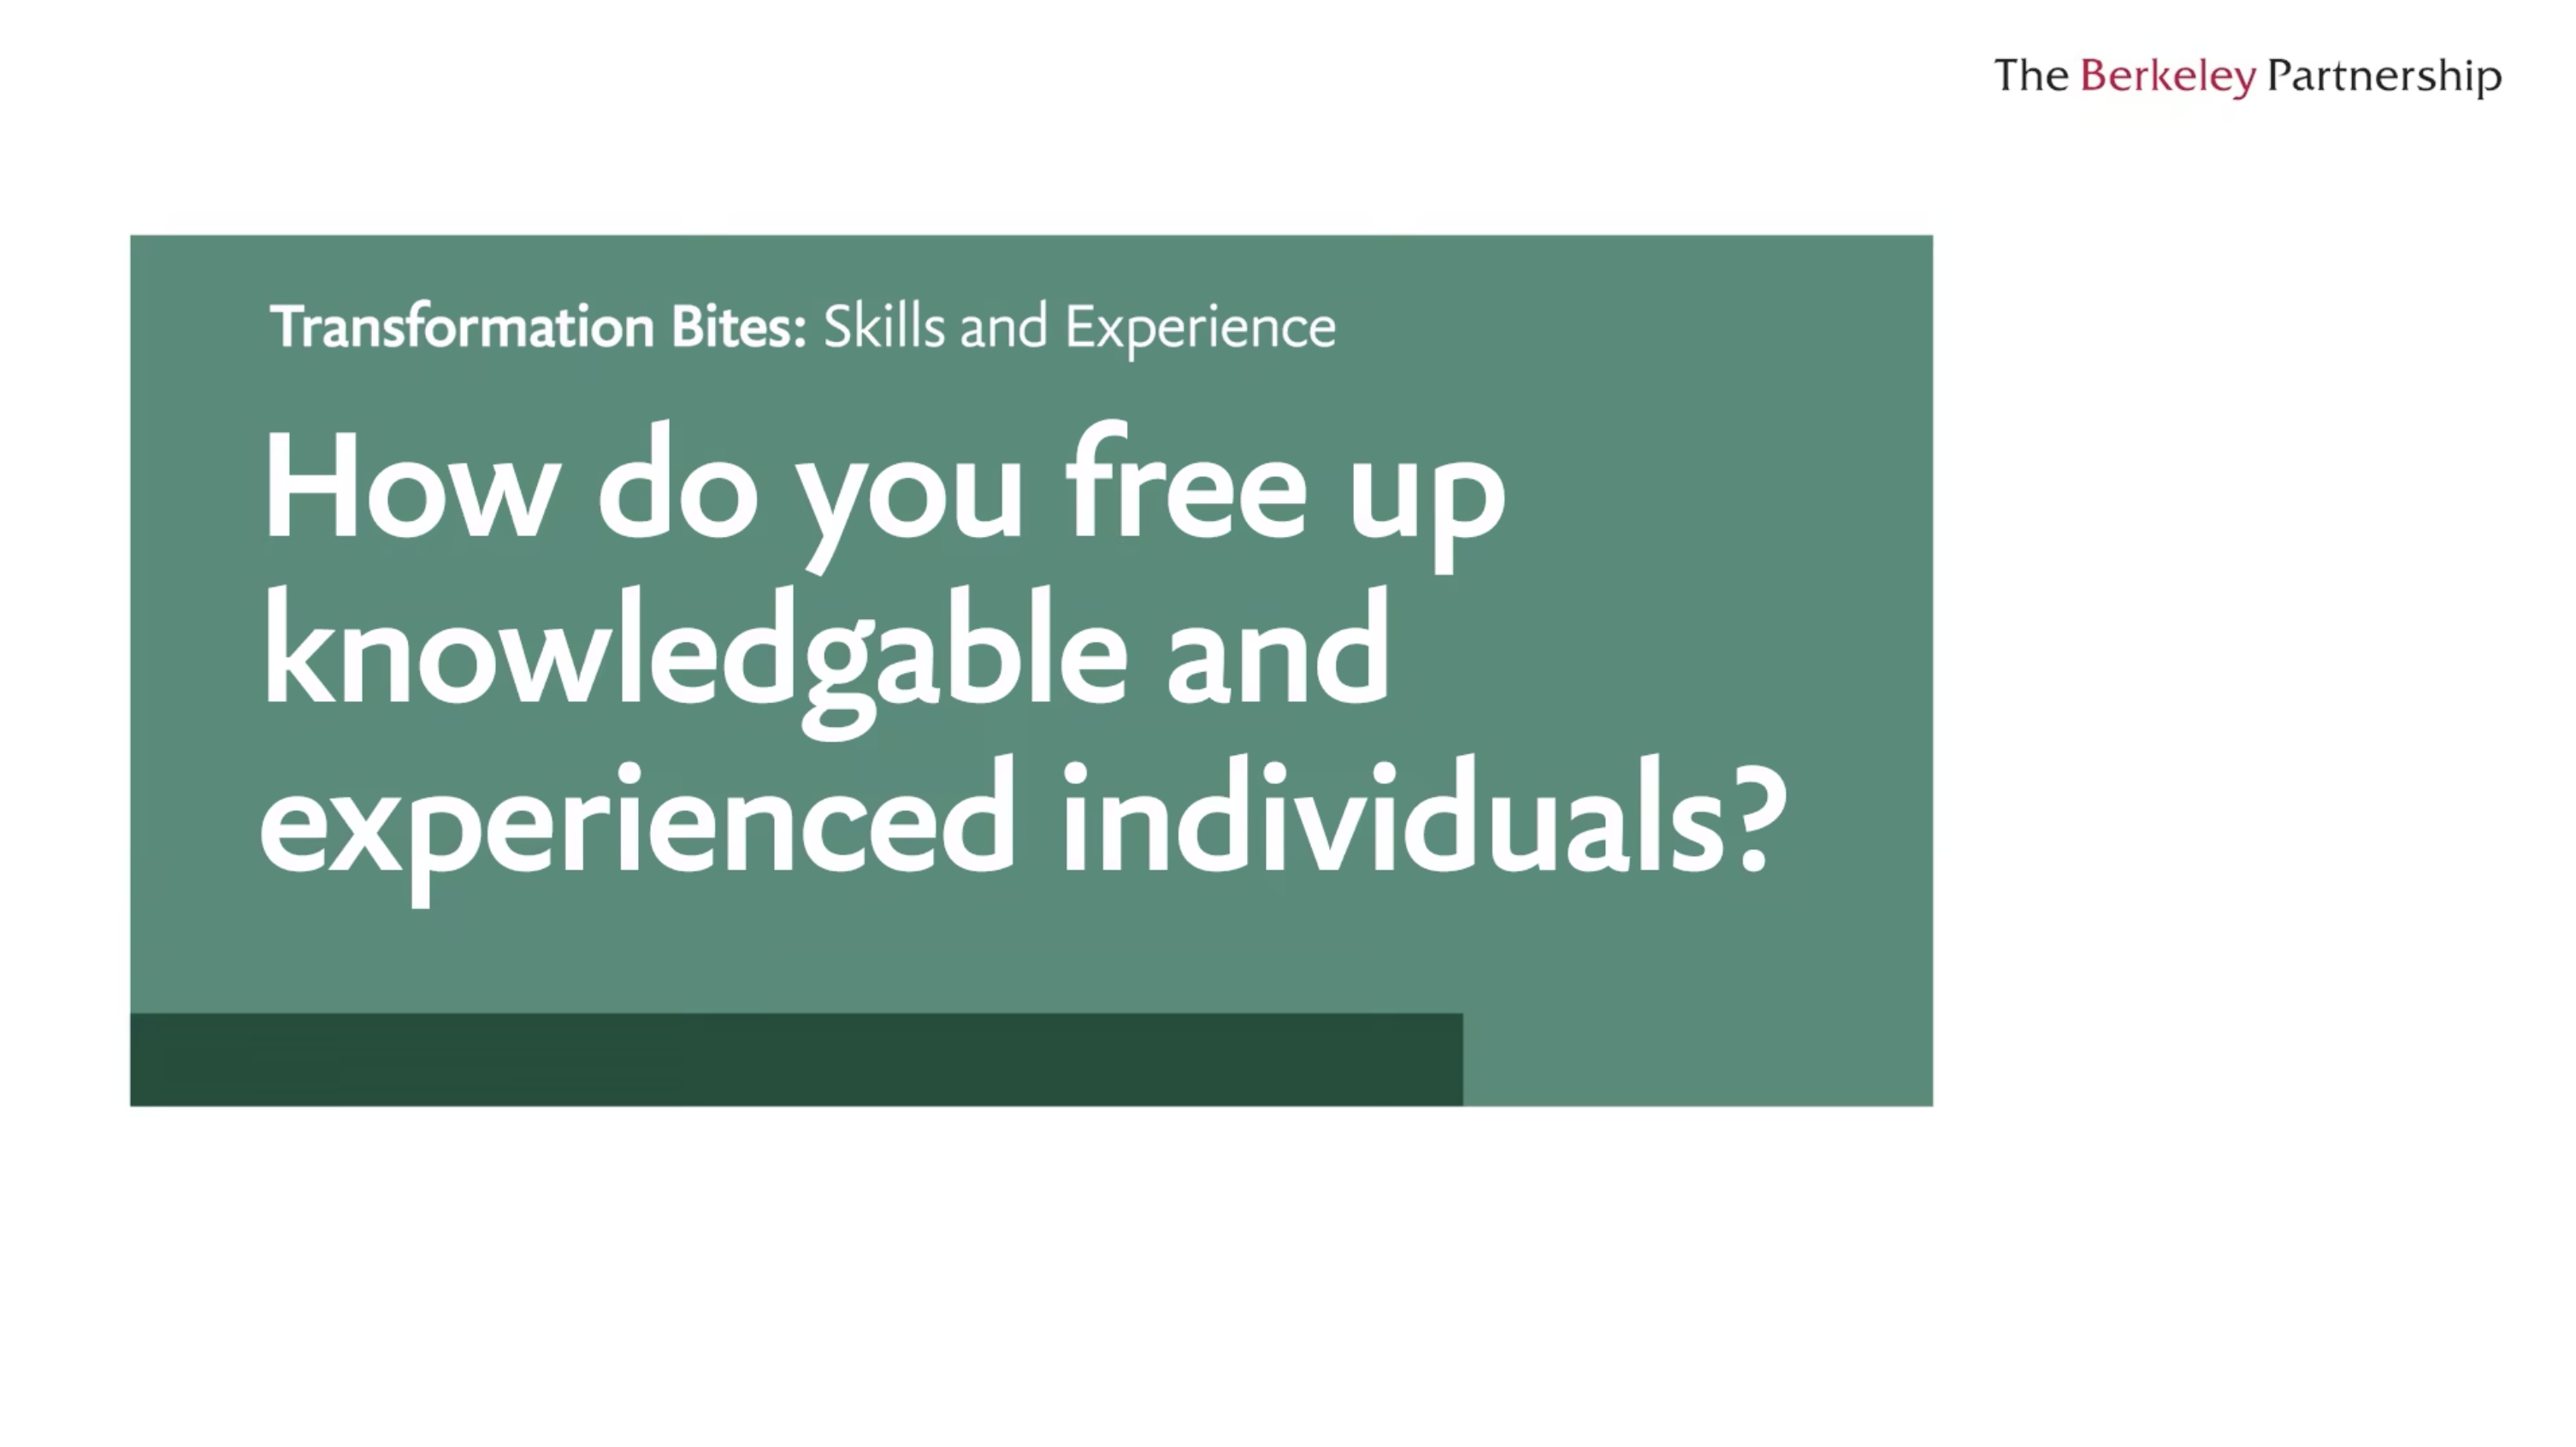 How do you free up knowledgable and experienced individuals?